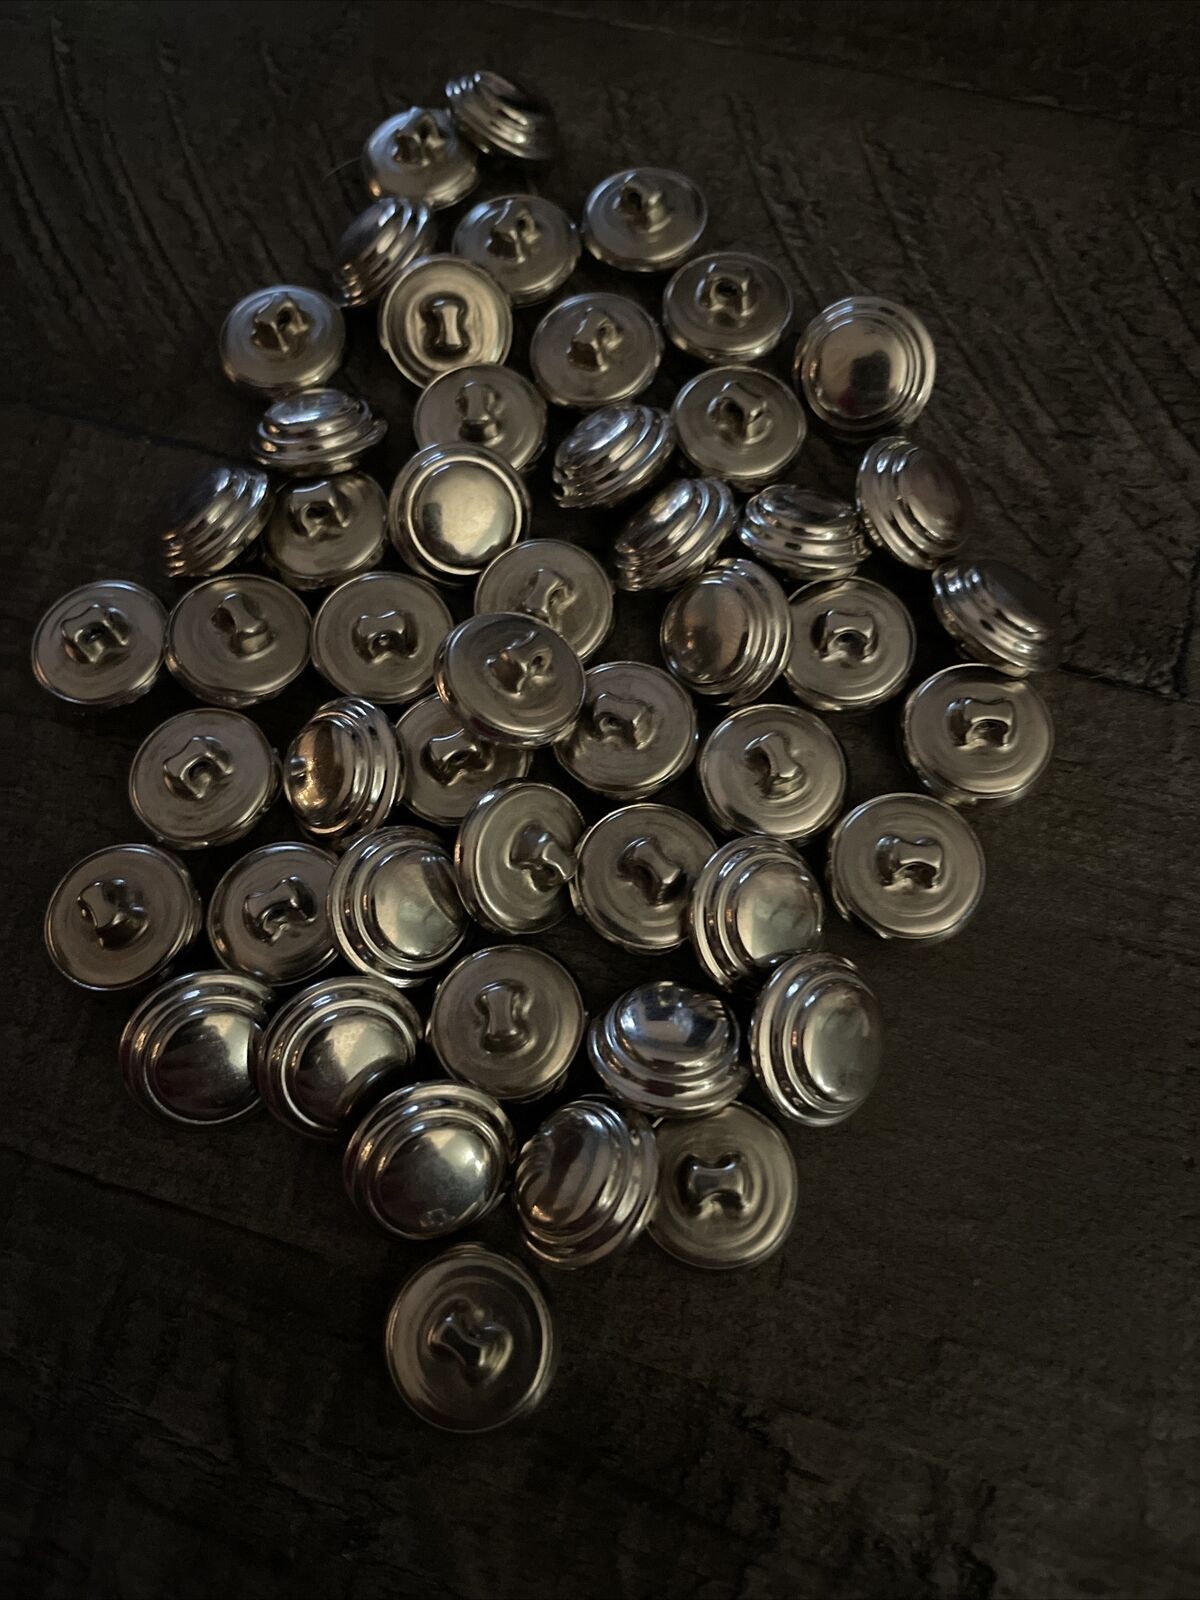 Vintage Metal Shank Buttons, Lot of 50 Matching, Nicely Detailed